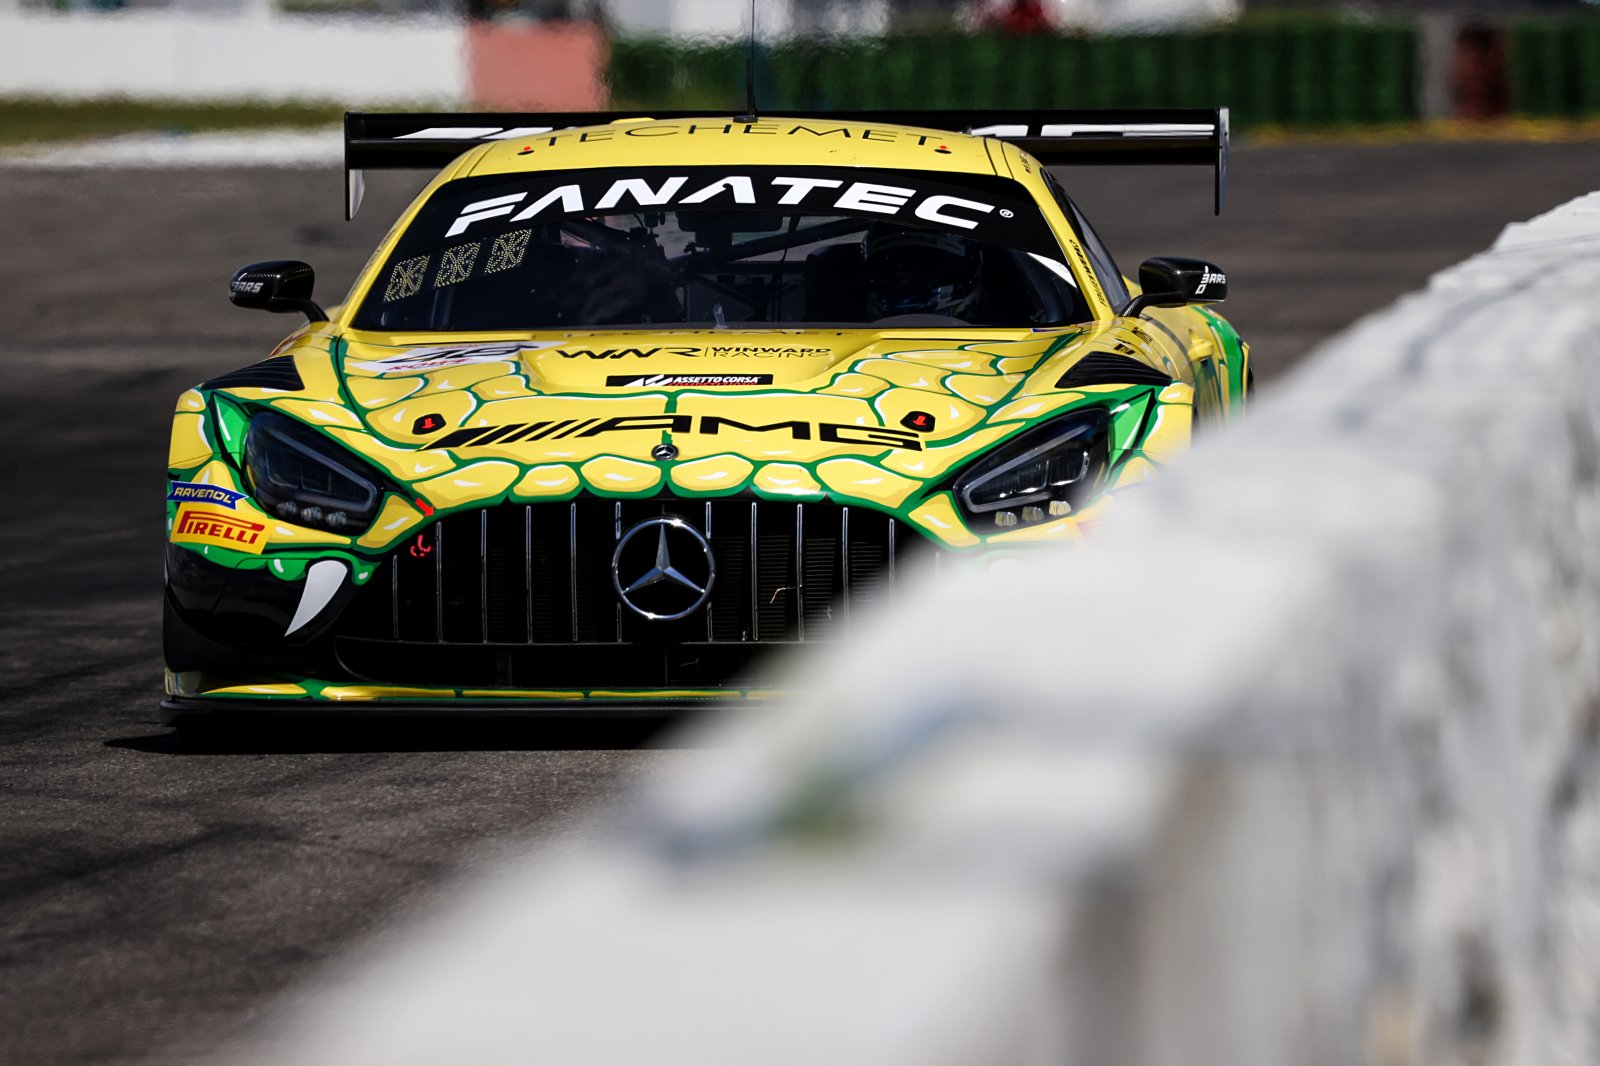 Mercedes-AMG ace Engel hits the front for Winward Racing Team-Mann Filter